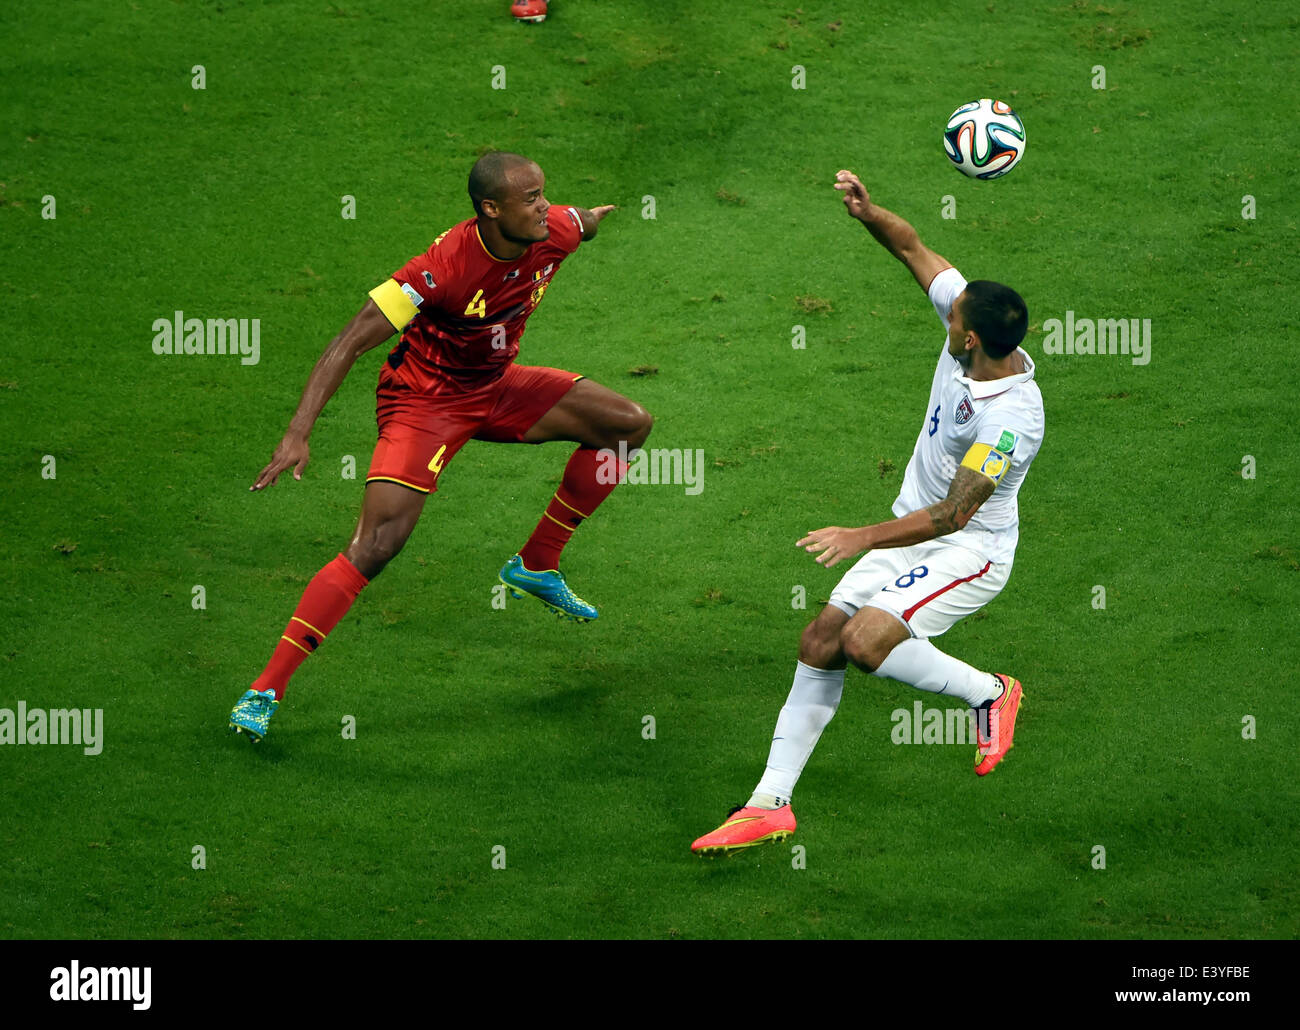 Salvador, Brazil. 1st July, 2014. Clint Dempsey (R) of the U.S. vies with Belgium's Vincent Kompany during a Round of 16 match between Belgium and the U.S. of 2014 FIFA World Cup at the Arena Fonte Nova Stadium in Salvador, Brazil, on July 1, 2014. Credit:  Guo Yong/Xinhua/Alamy Live News Stock Photo